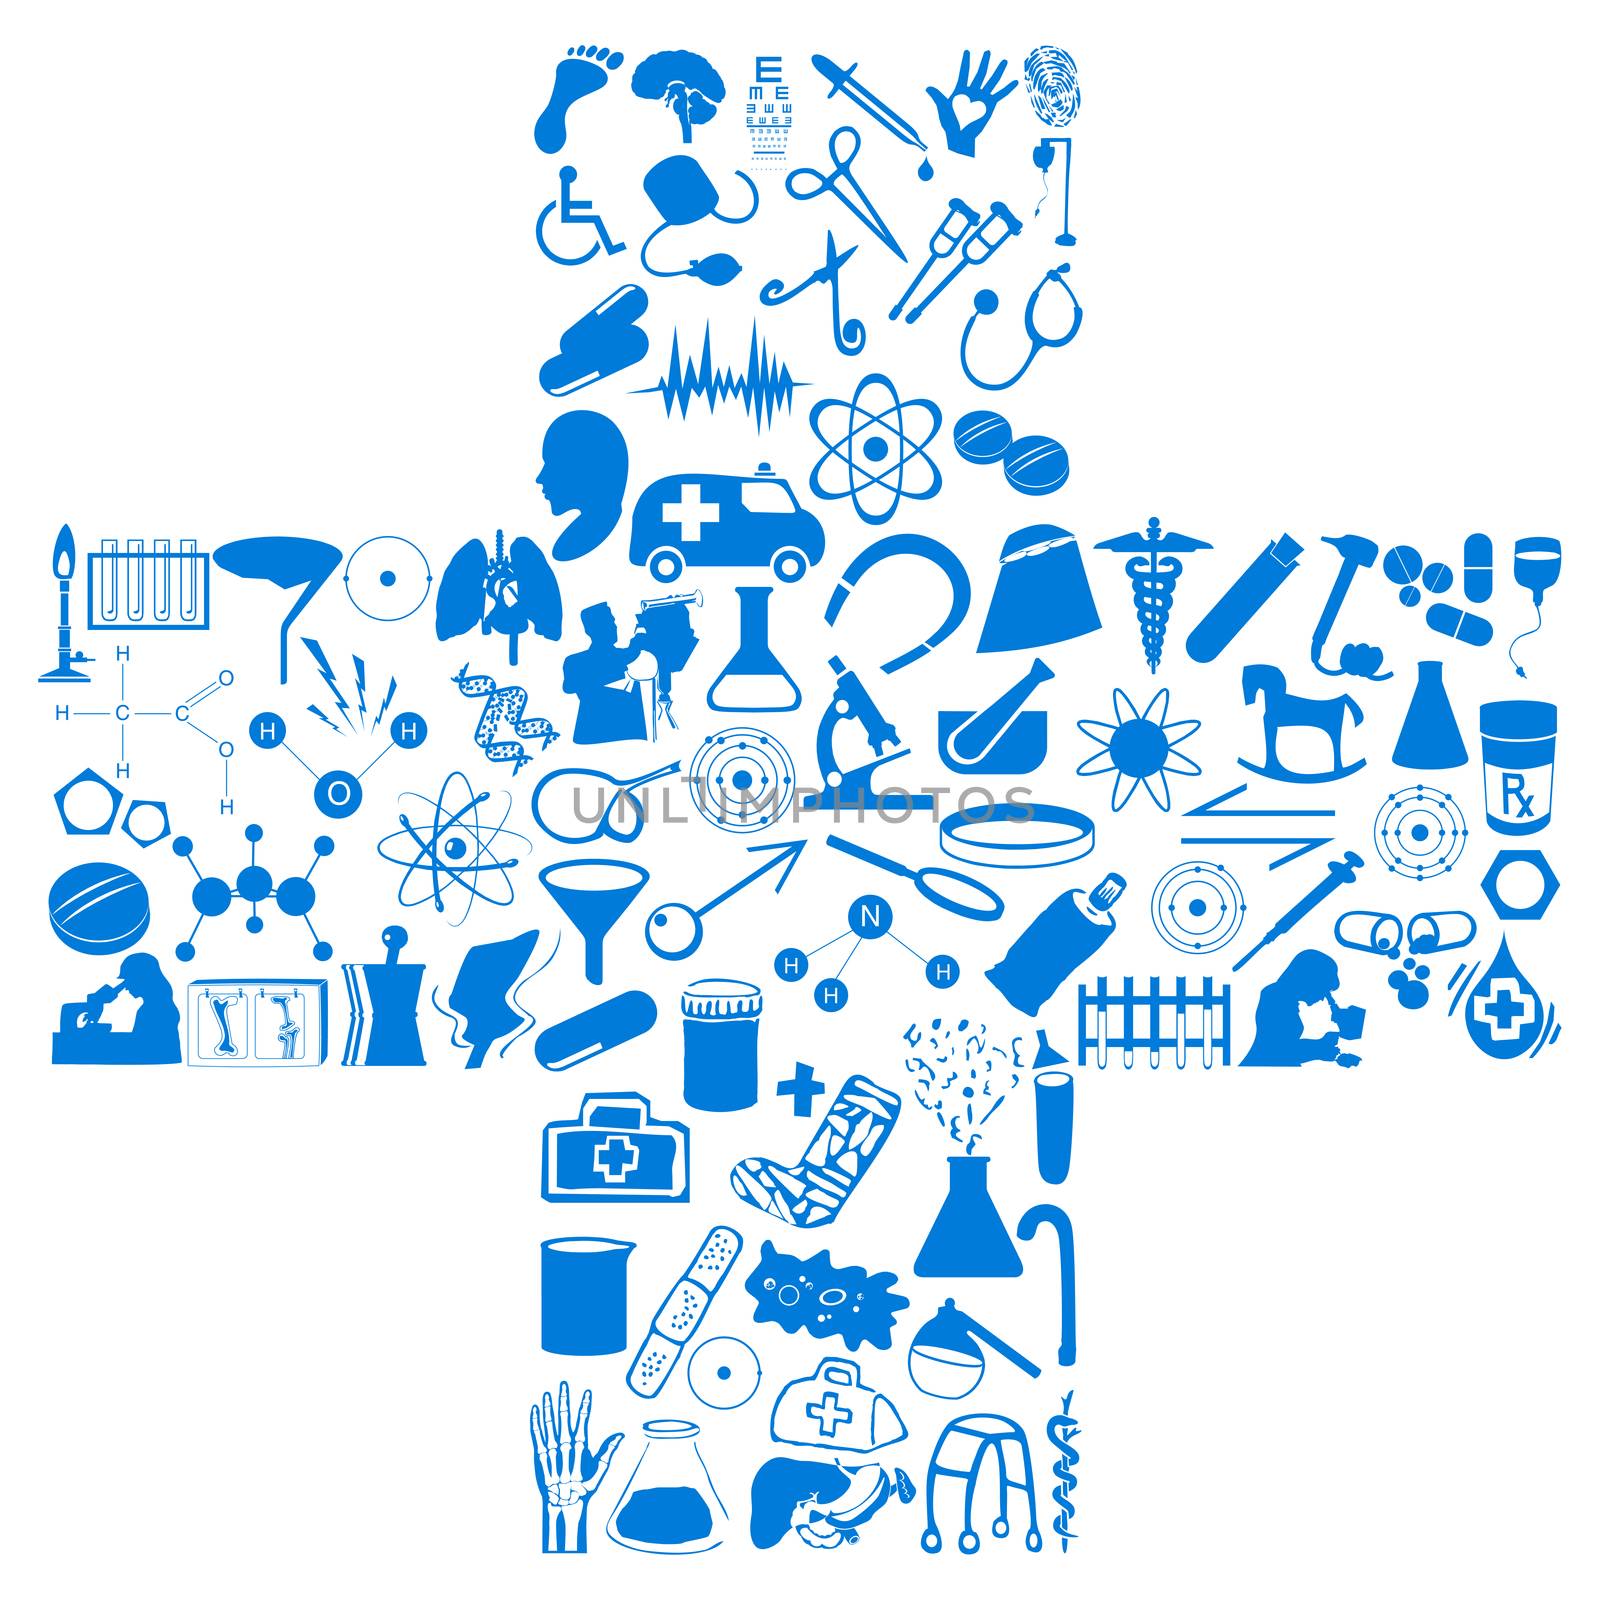 Icons related to Healthcare and Medical industries